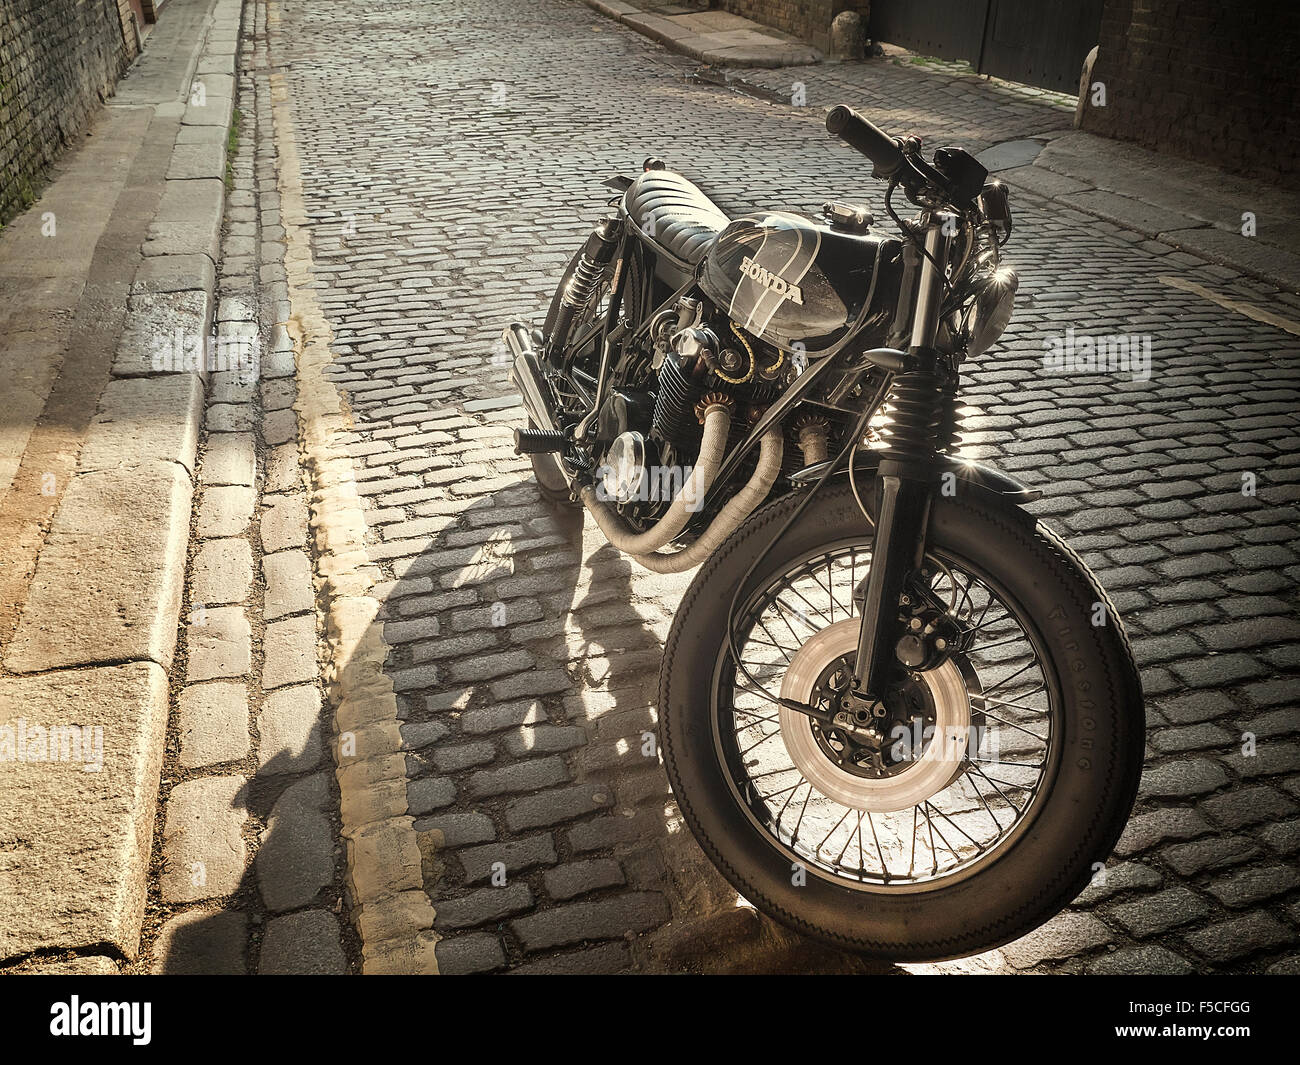 Classic Honda Cafe Racer motorcycle parked on a London street Stock Photo